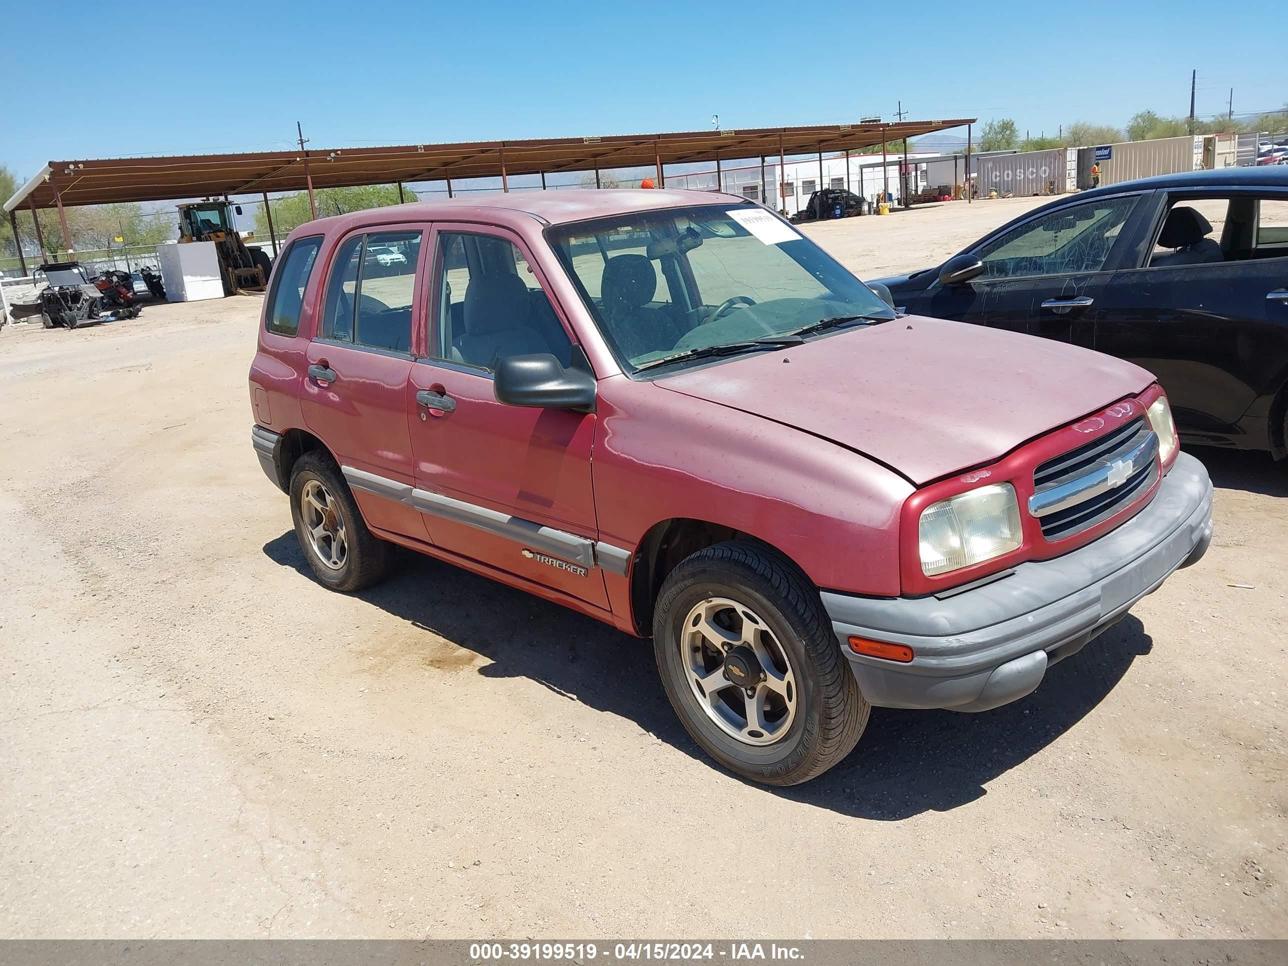 vin: 2CNBE13C9Y6911223 2CNBE13C9Y6911223 2000 chevrolet tracker 2000 for Sale in 85714, 4650 E Irvington Rd, Tucson, Arizona, USA